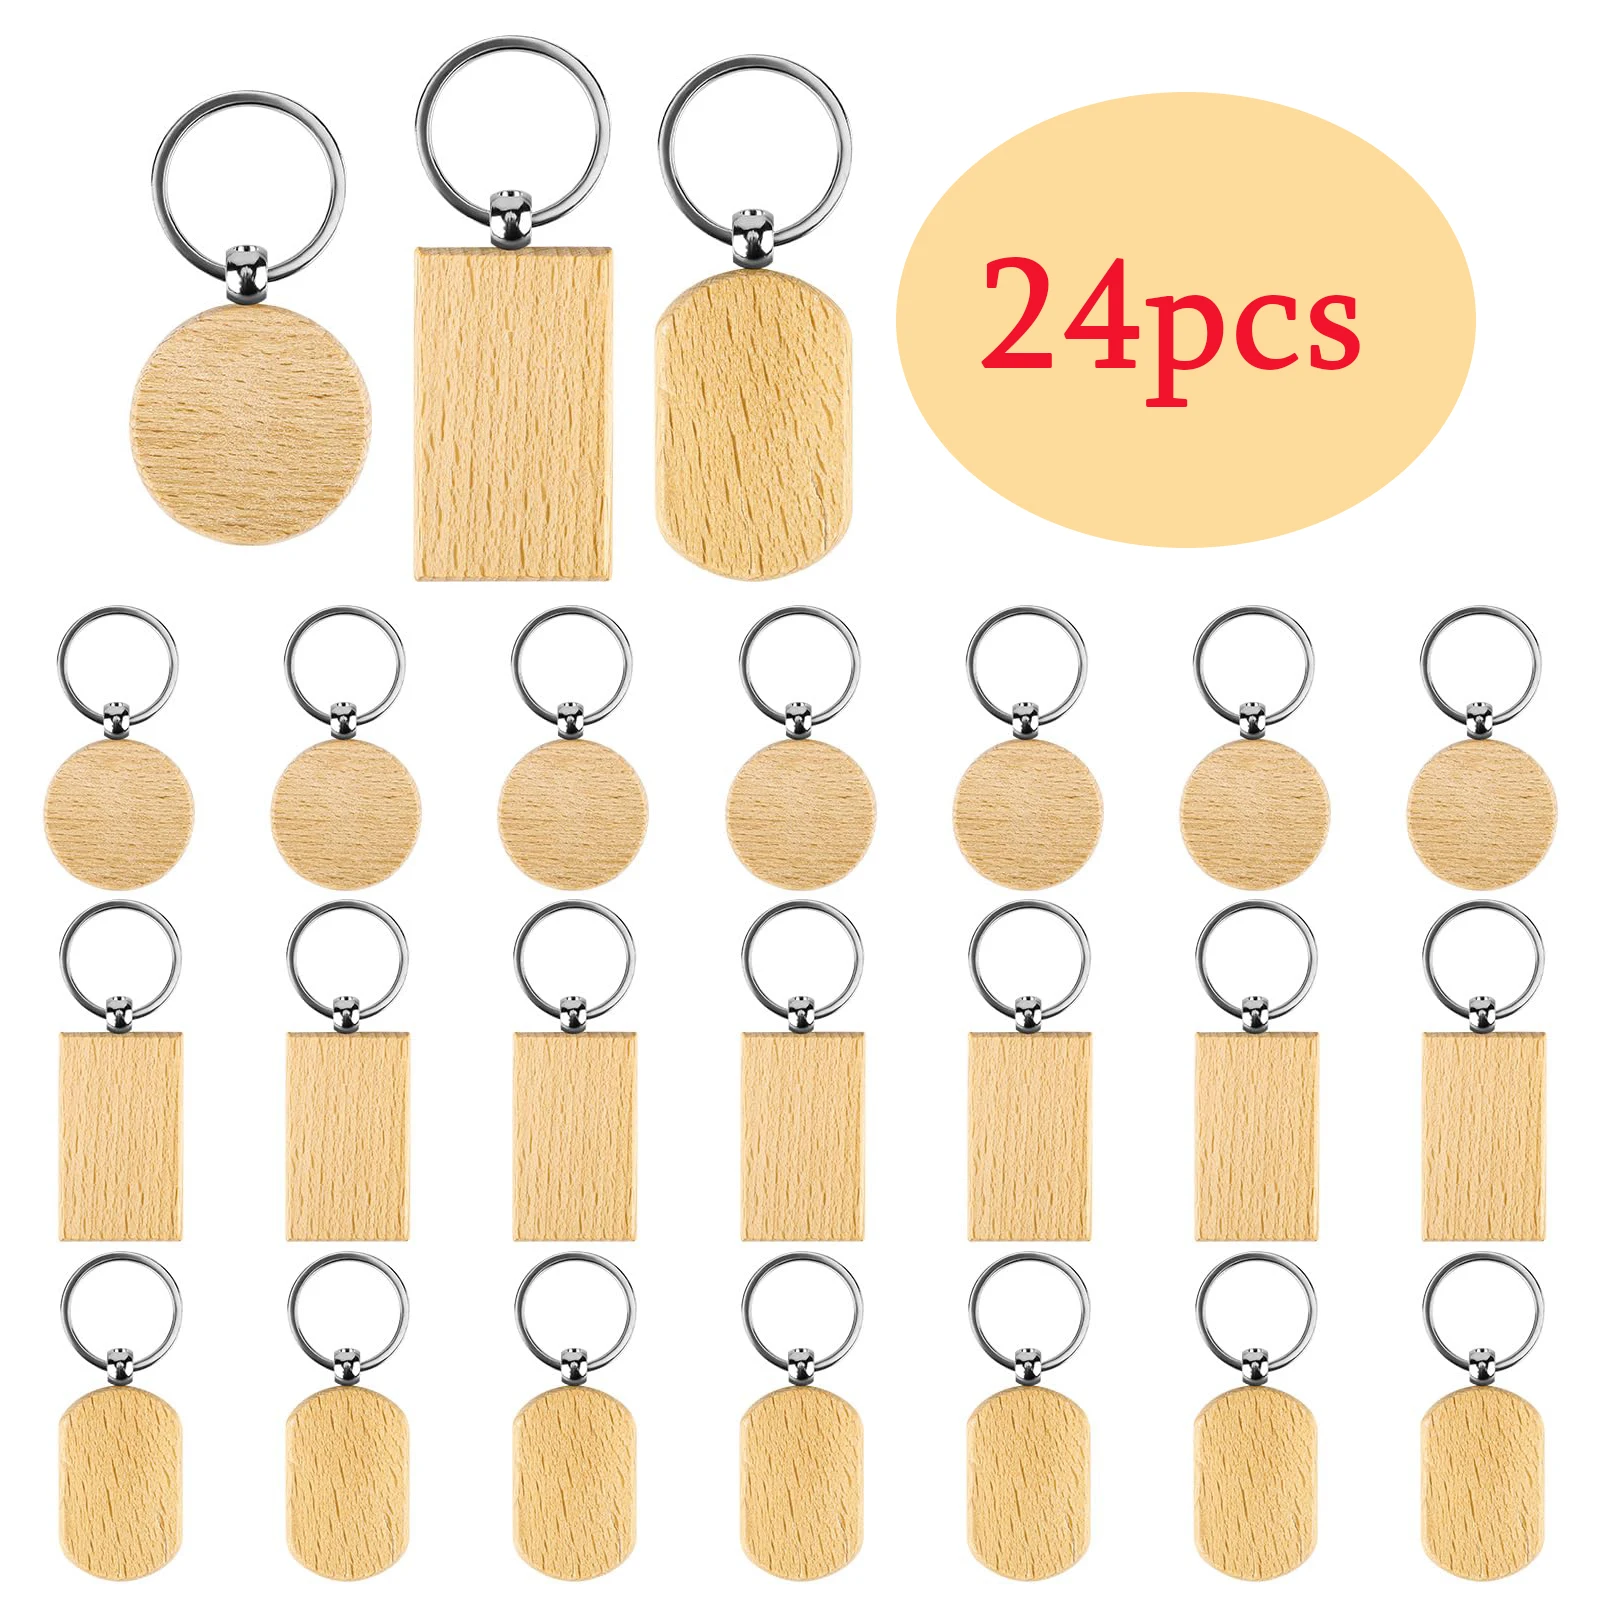 

24pcs Wood Engraving Blanks Tags Keychains Keyrings with Wooden Pendants Wood Accessories Gift